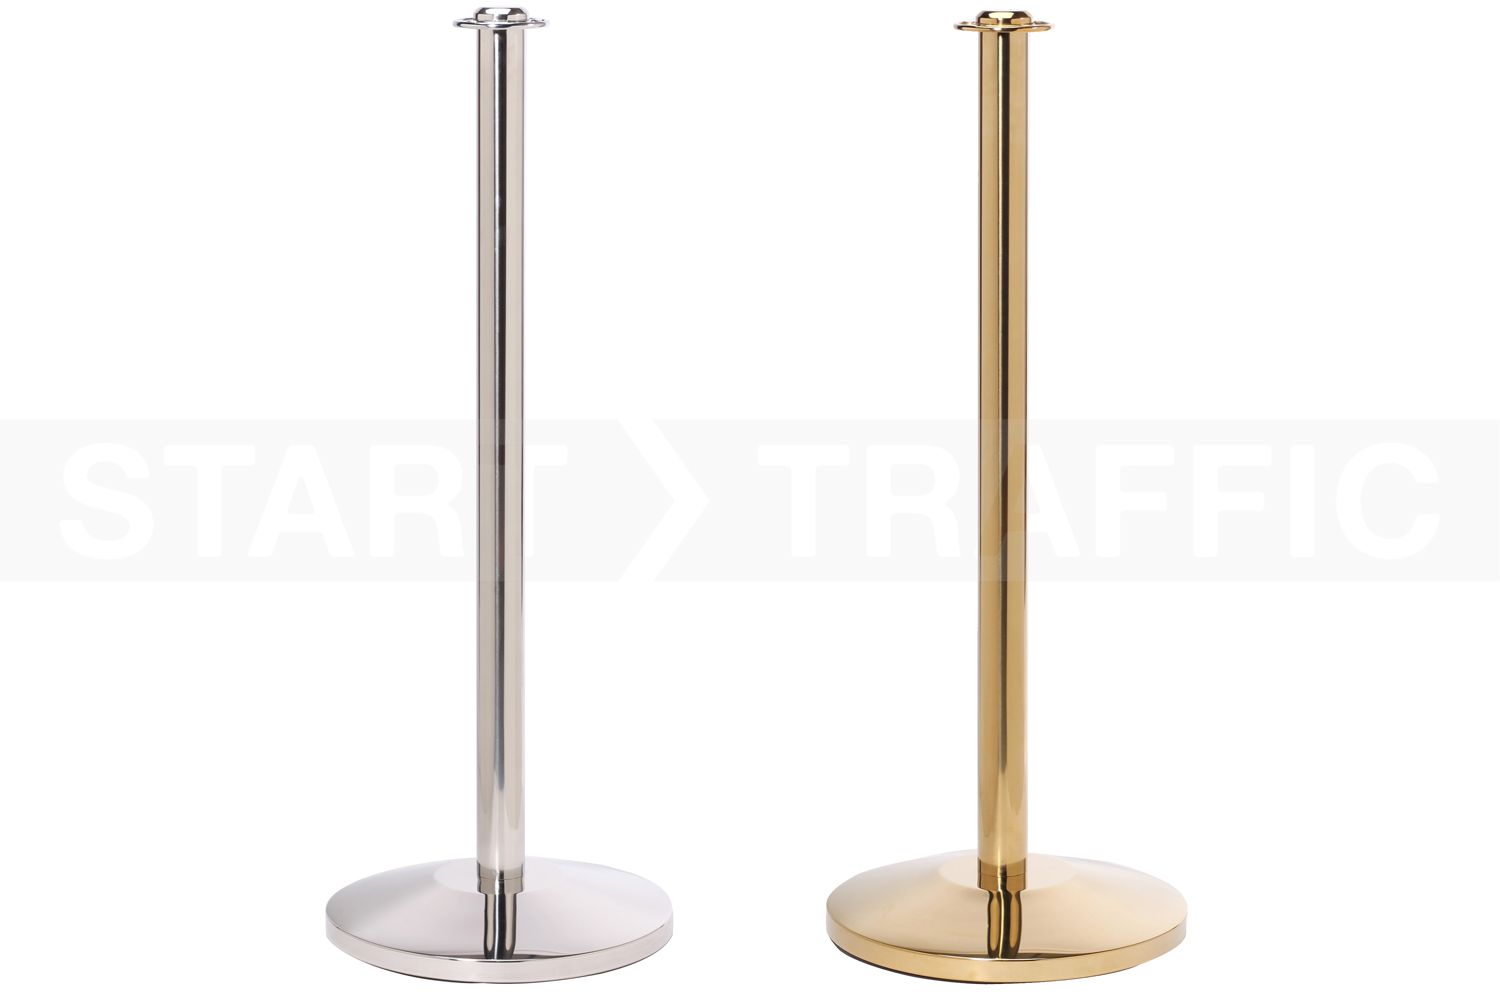 Post colour options, Polished Brass or Chrome